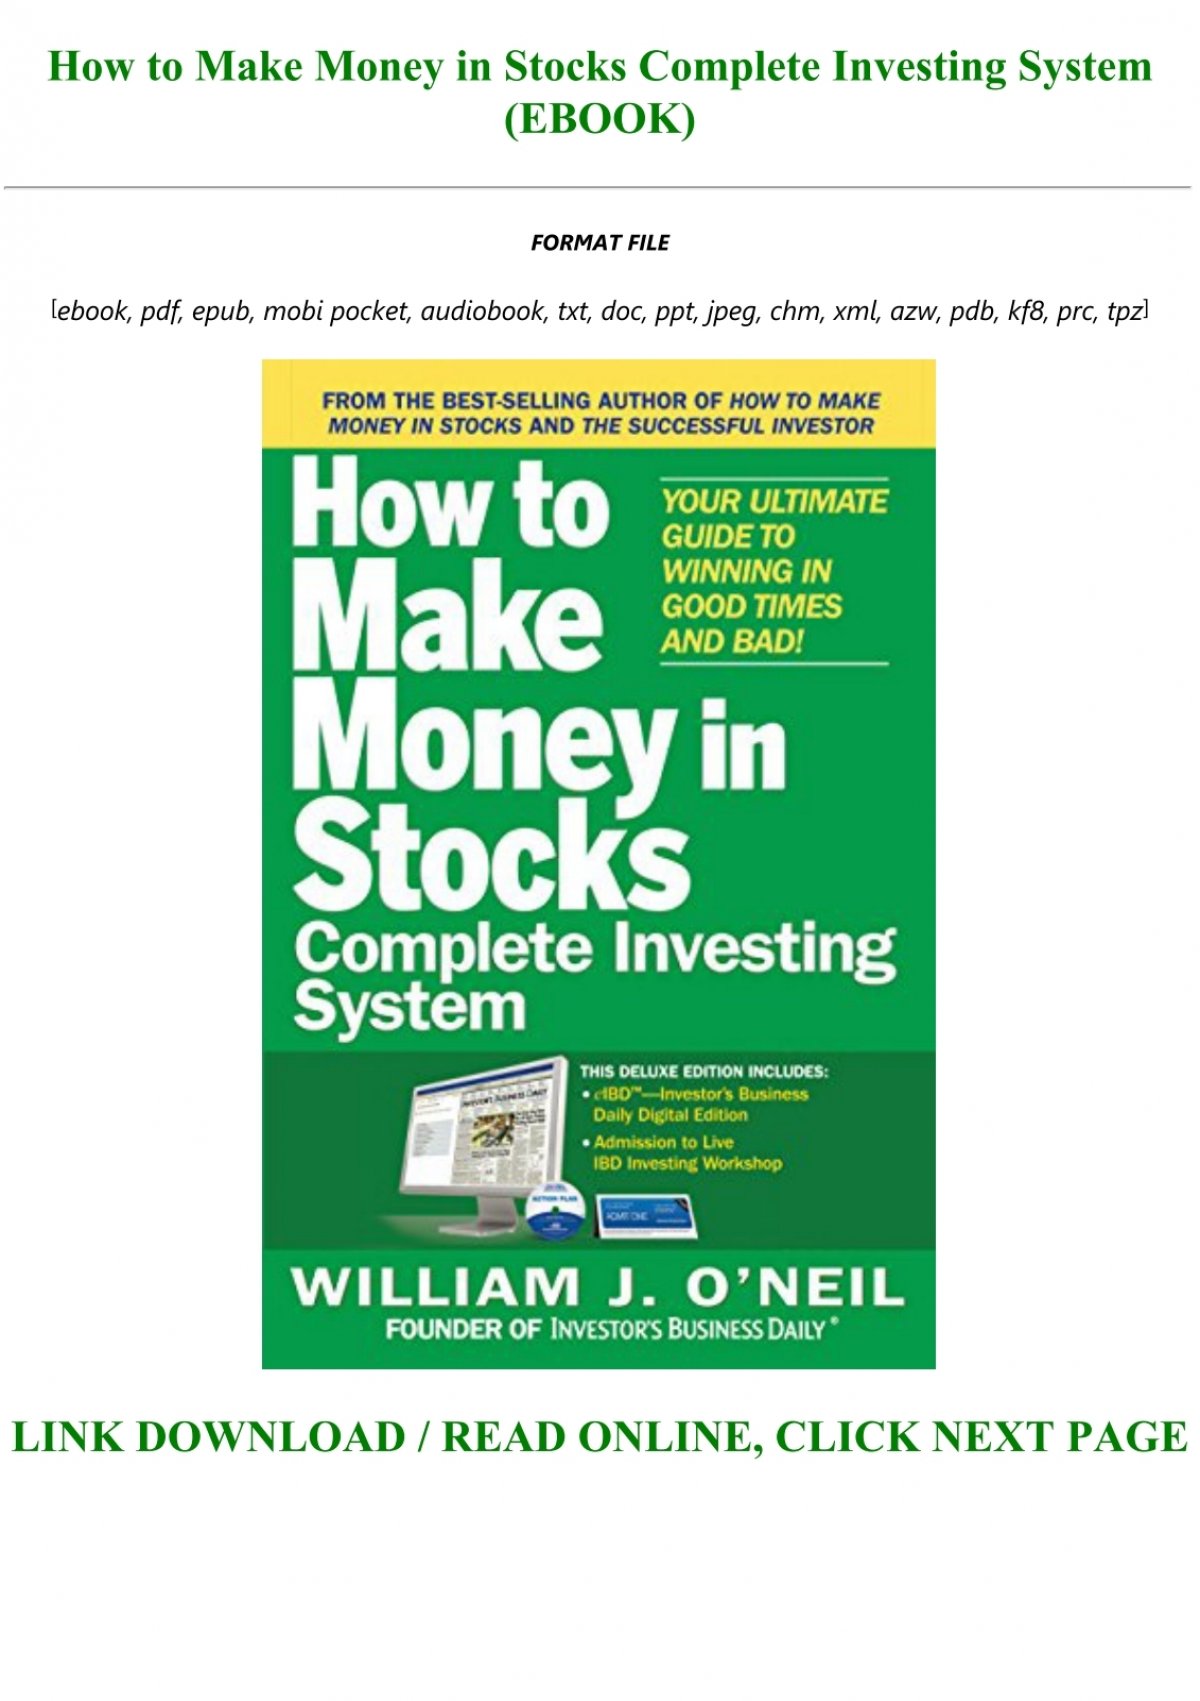 fees of investing in single stocks - Money|Stocks|Stock|System|Book|Market|Trading|Books|Guide|Times|Day|Der|Download|Investors|Edition|Investor|Description|Pdf|Format|Epub|O'neil|Die|Strategies|Strategy|Mit|Investing|Dummies|Risk|Gains|Business|Man|Investment|Years|World|Wie|Action|Charts|William|Dad|Plan|Good Times|Stock Market|Ultimate Guide|Mobi Format|Full Book|Day Trading|National Bestseller|Successful Investing|Rich Dad|Seven-Step Process|Maximizing Gains|Major Study|American Association|Individual Investors|Mutual Funds|Book Description|Download Book Description|Handbuch Des|Stock Market Winners|12-Year Study|Leading Investment Strategies|Top-Performing Strategy|System-You Get|Easy Steps|Daily Resource|Big Winners|Market Rally|Big Losses|Market Downturn|Canslim Method